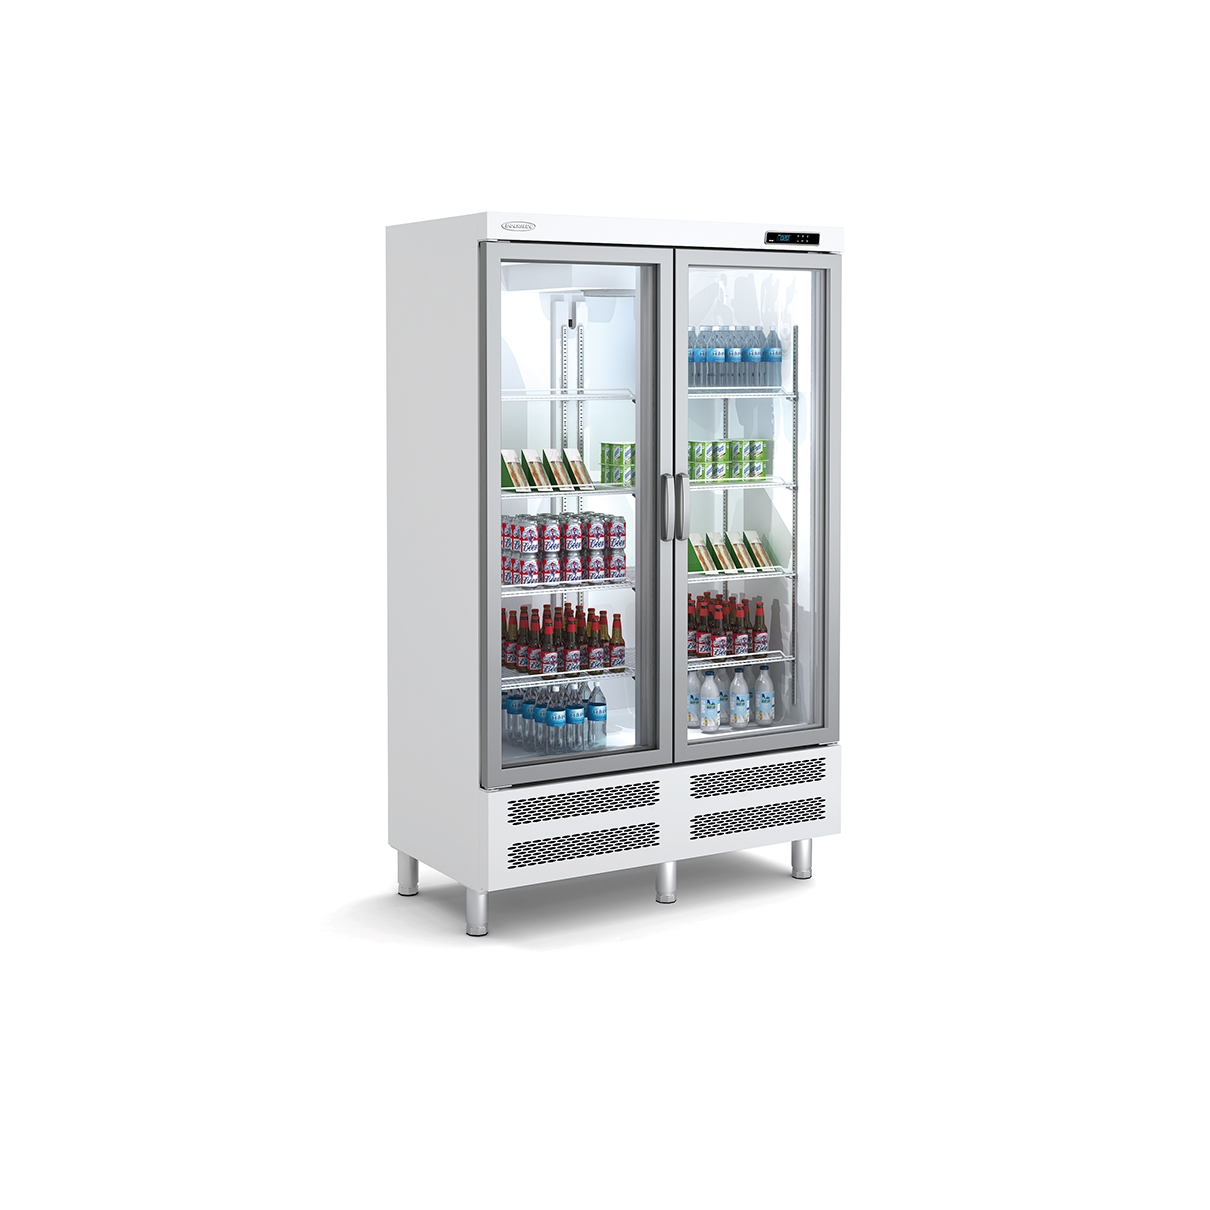 copy of Refrigerated Display Cabinet ARPA/ARPAC-125